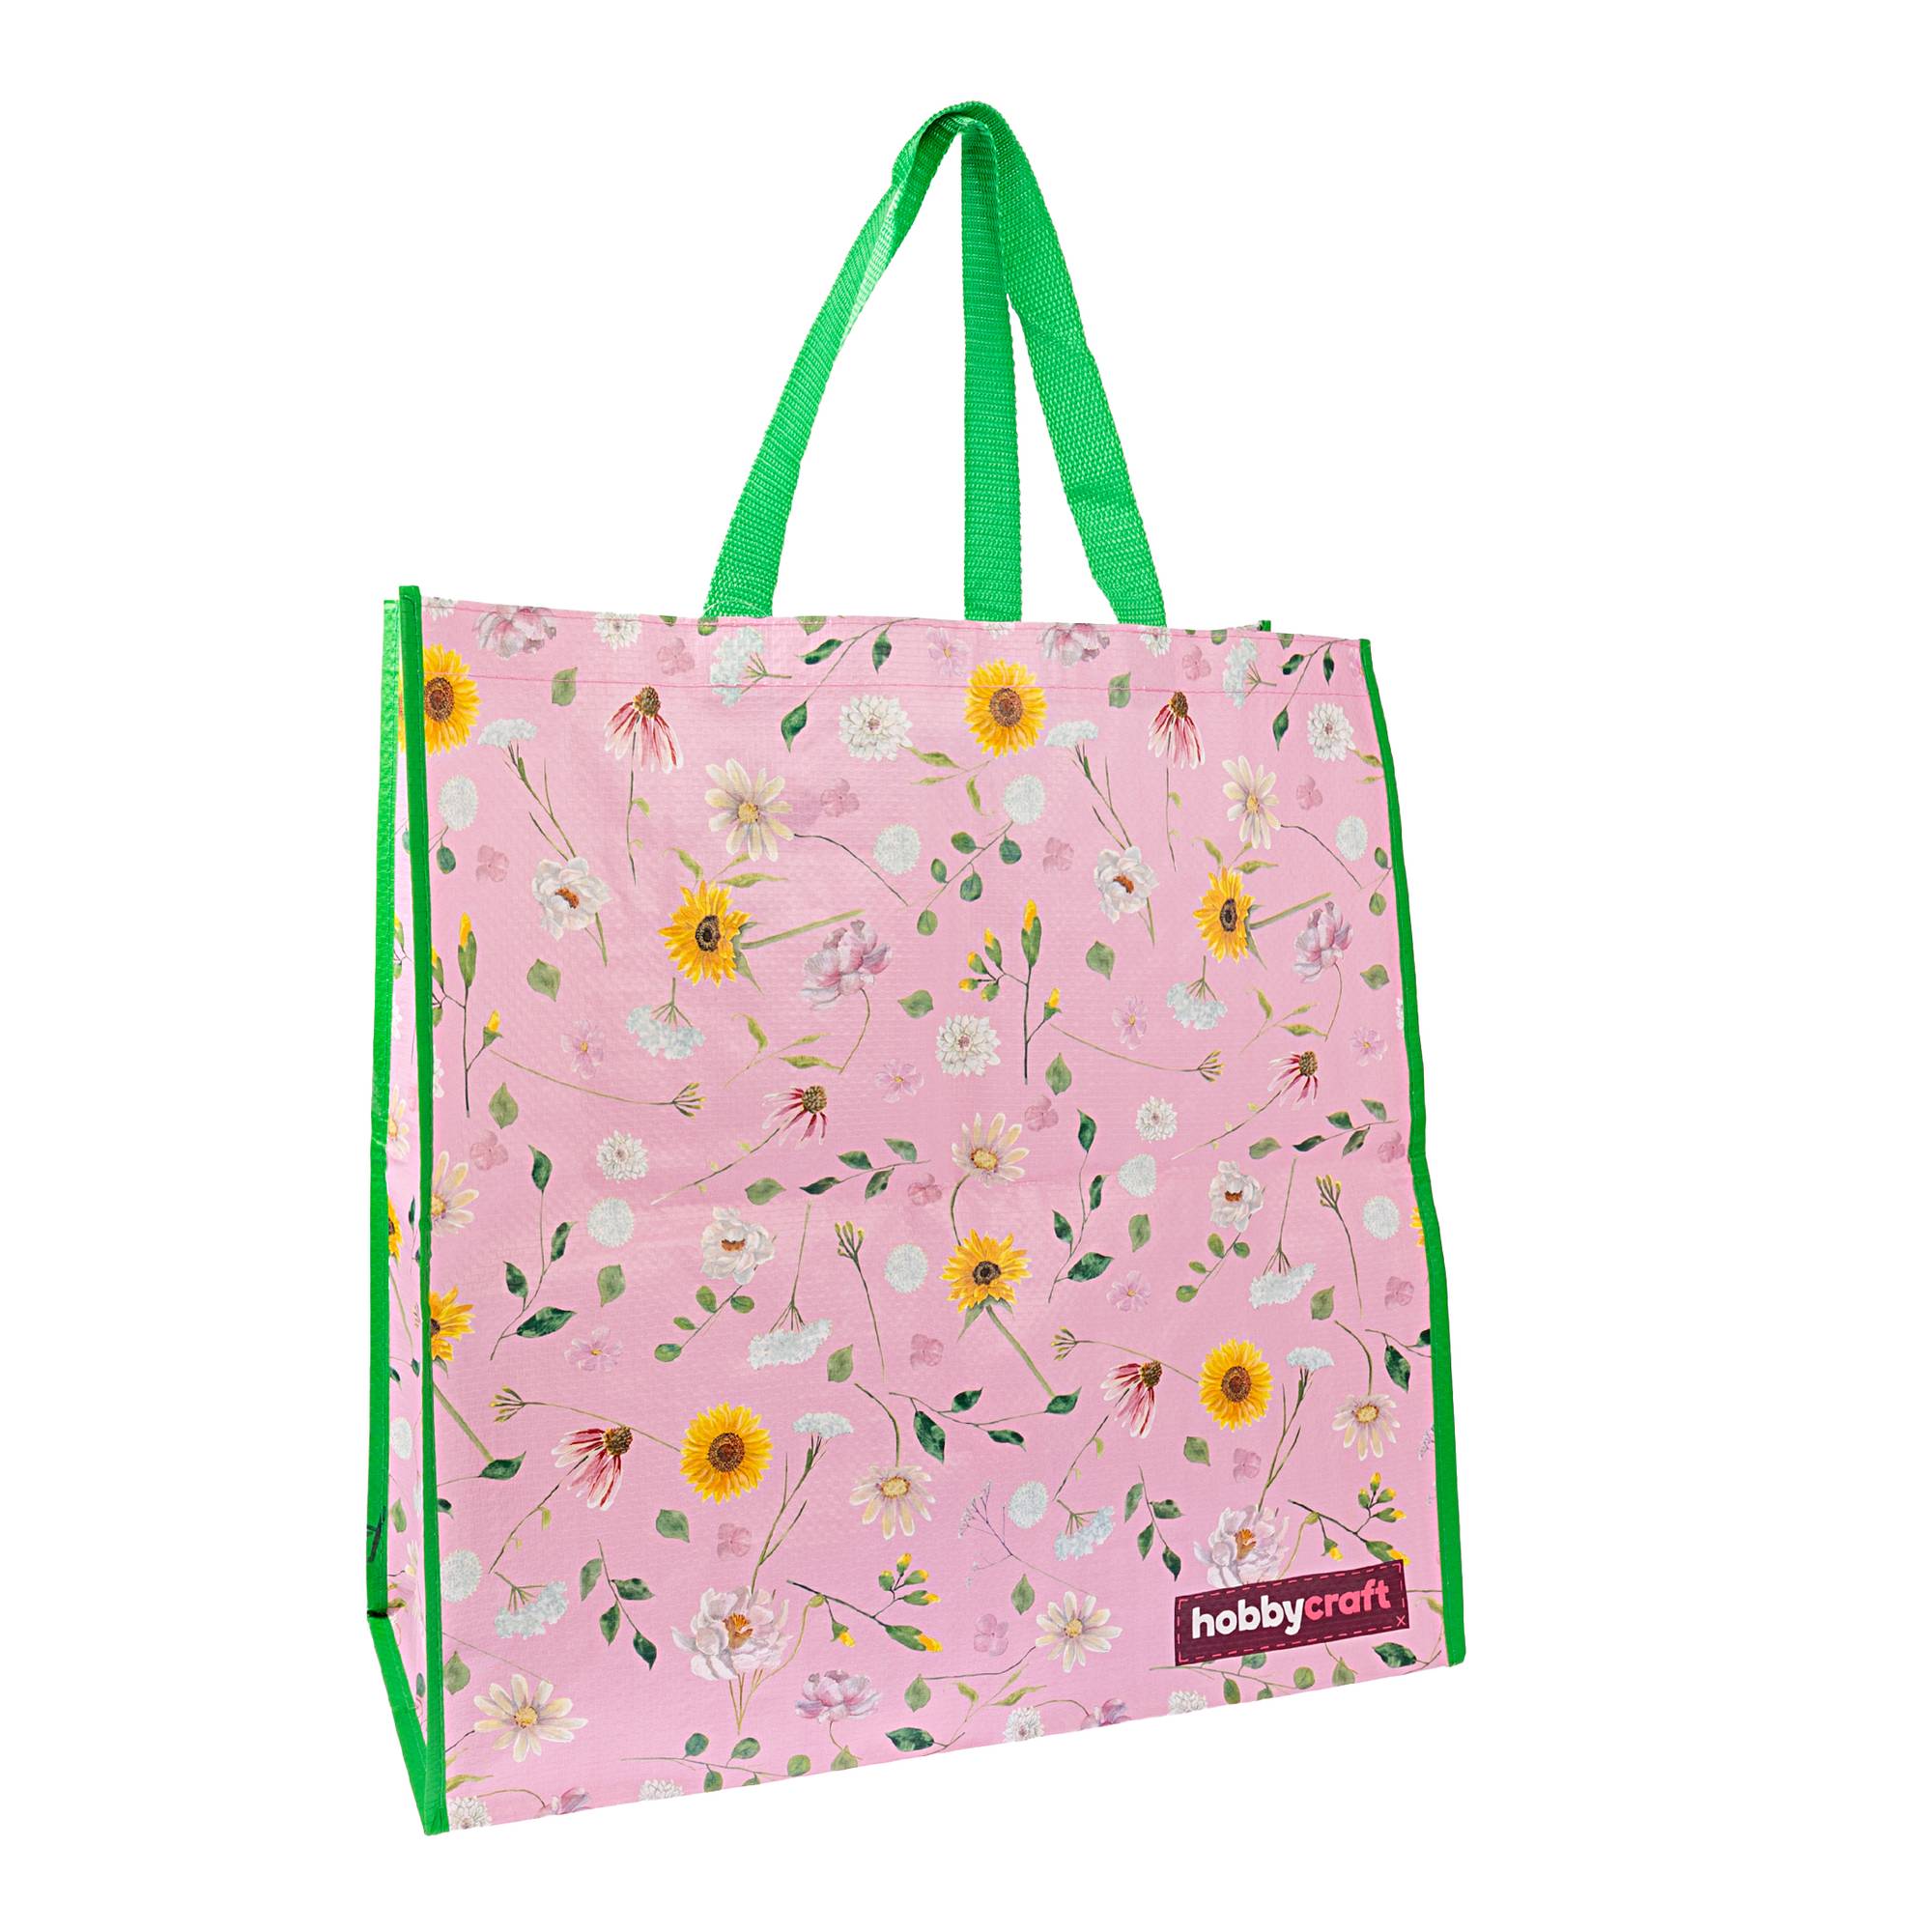 659980 1006 1 woven bag for life meadow flowers